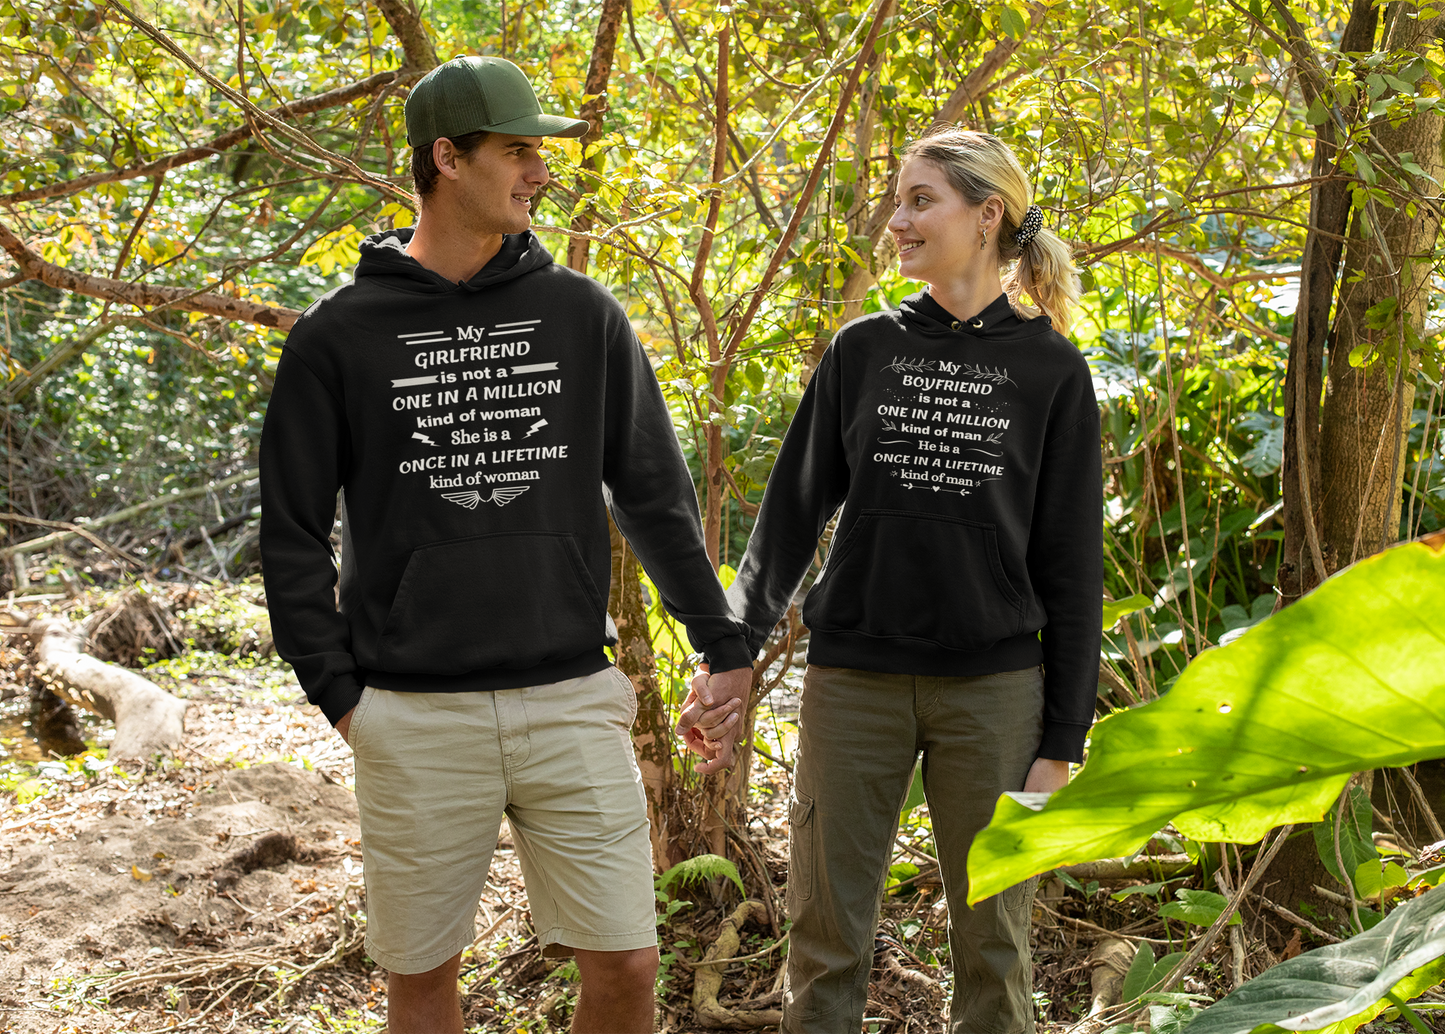 Once in a Lifetime Girlfriend and Boyfriend - Matching Couple Hoodies